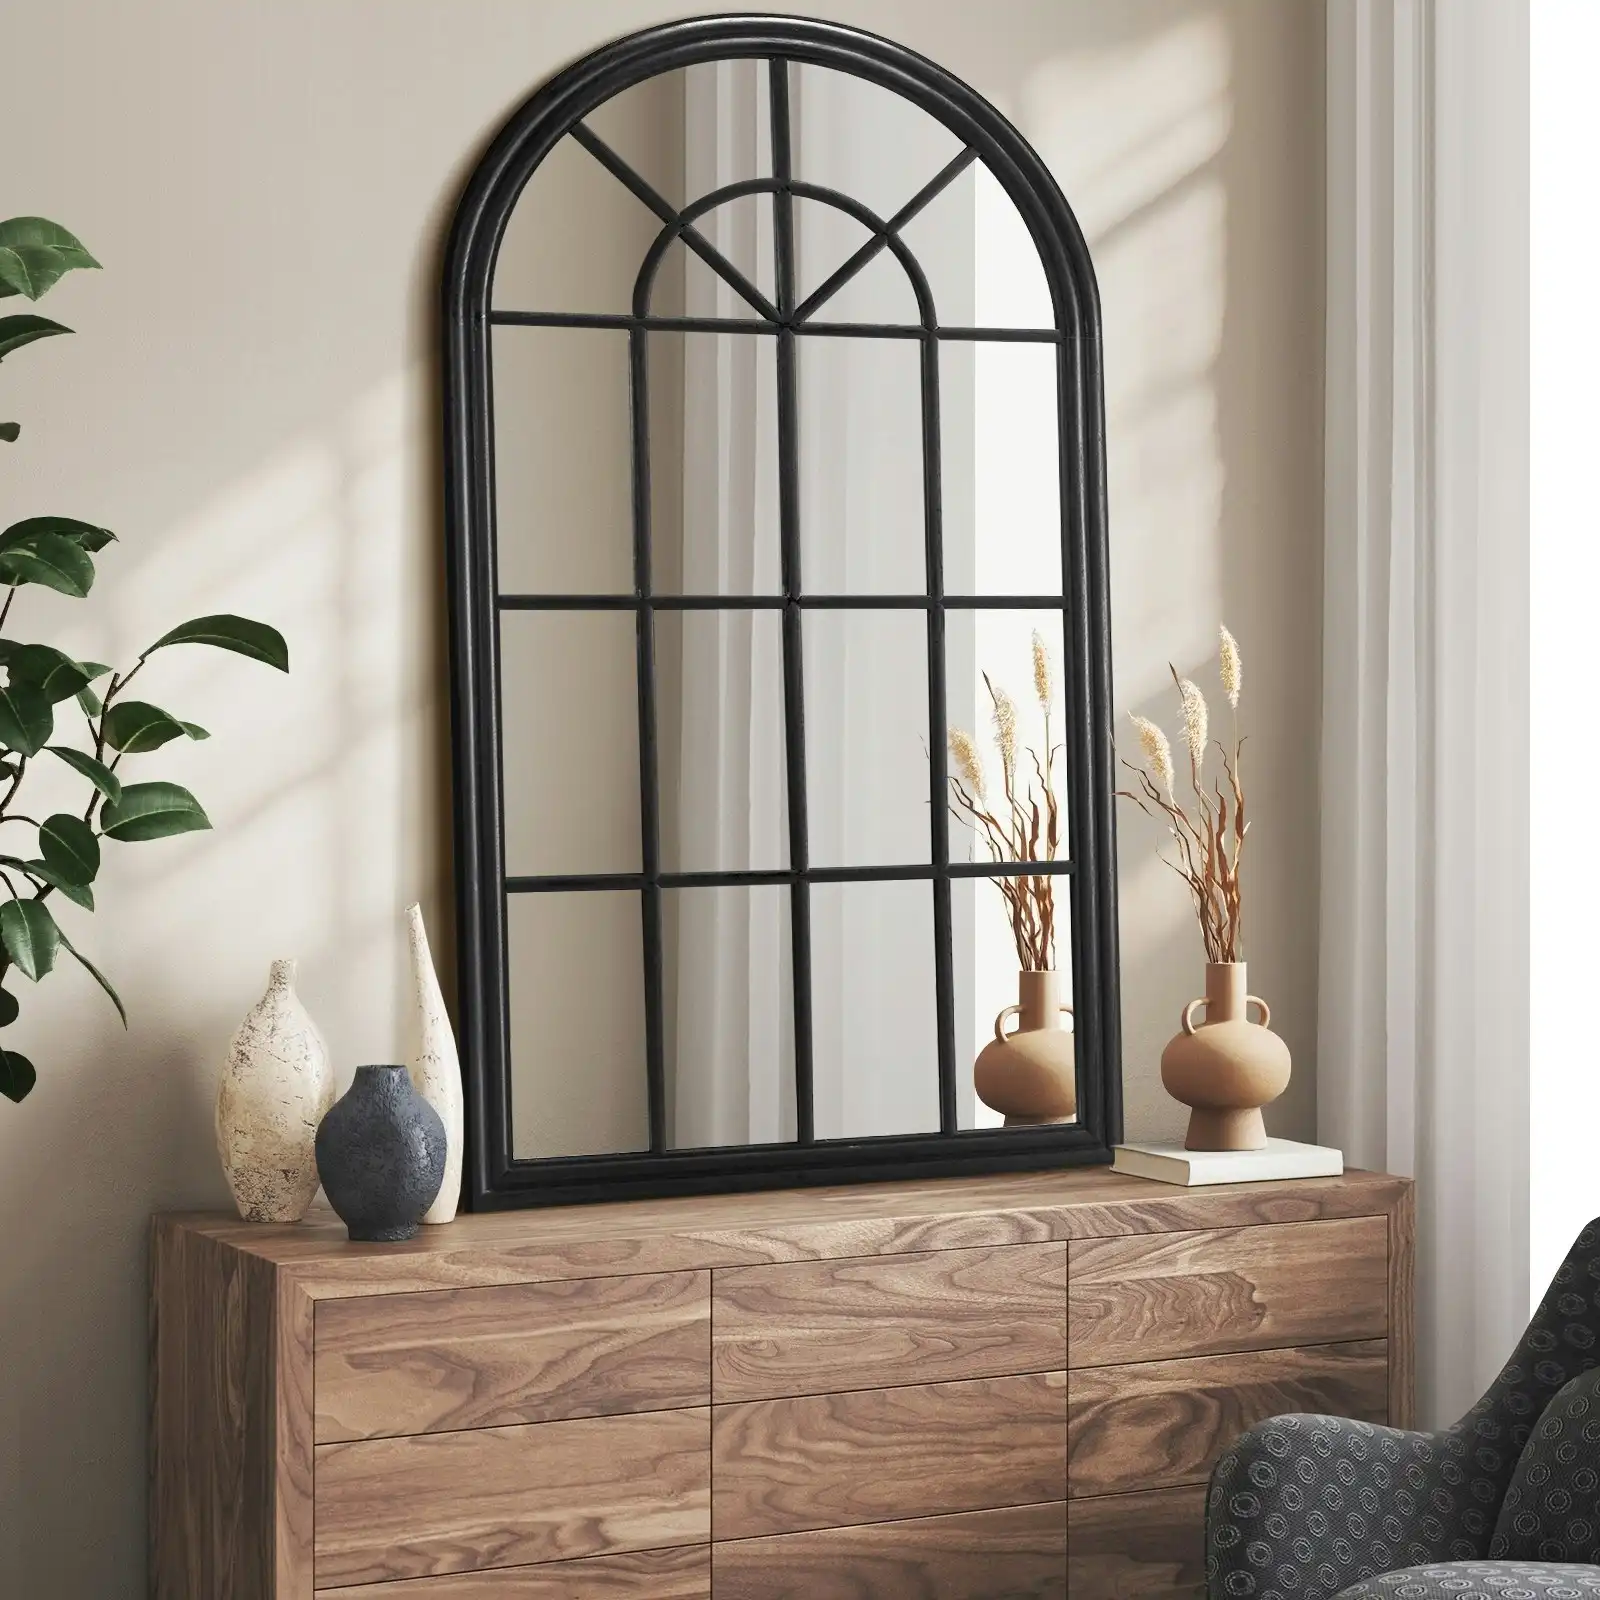 Oikiture Wooden Window Mirror Arched Wall Mirrors Decor 130x70cm Black